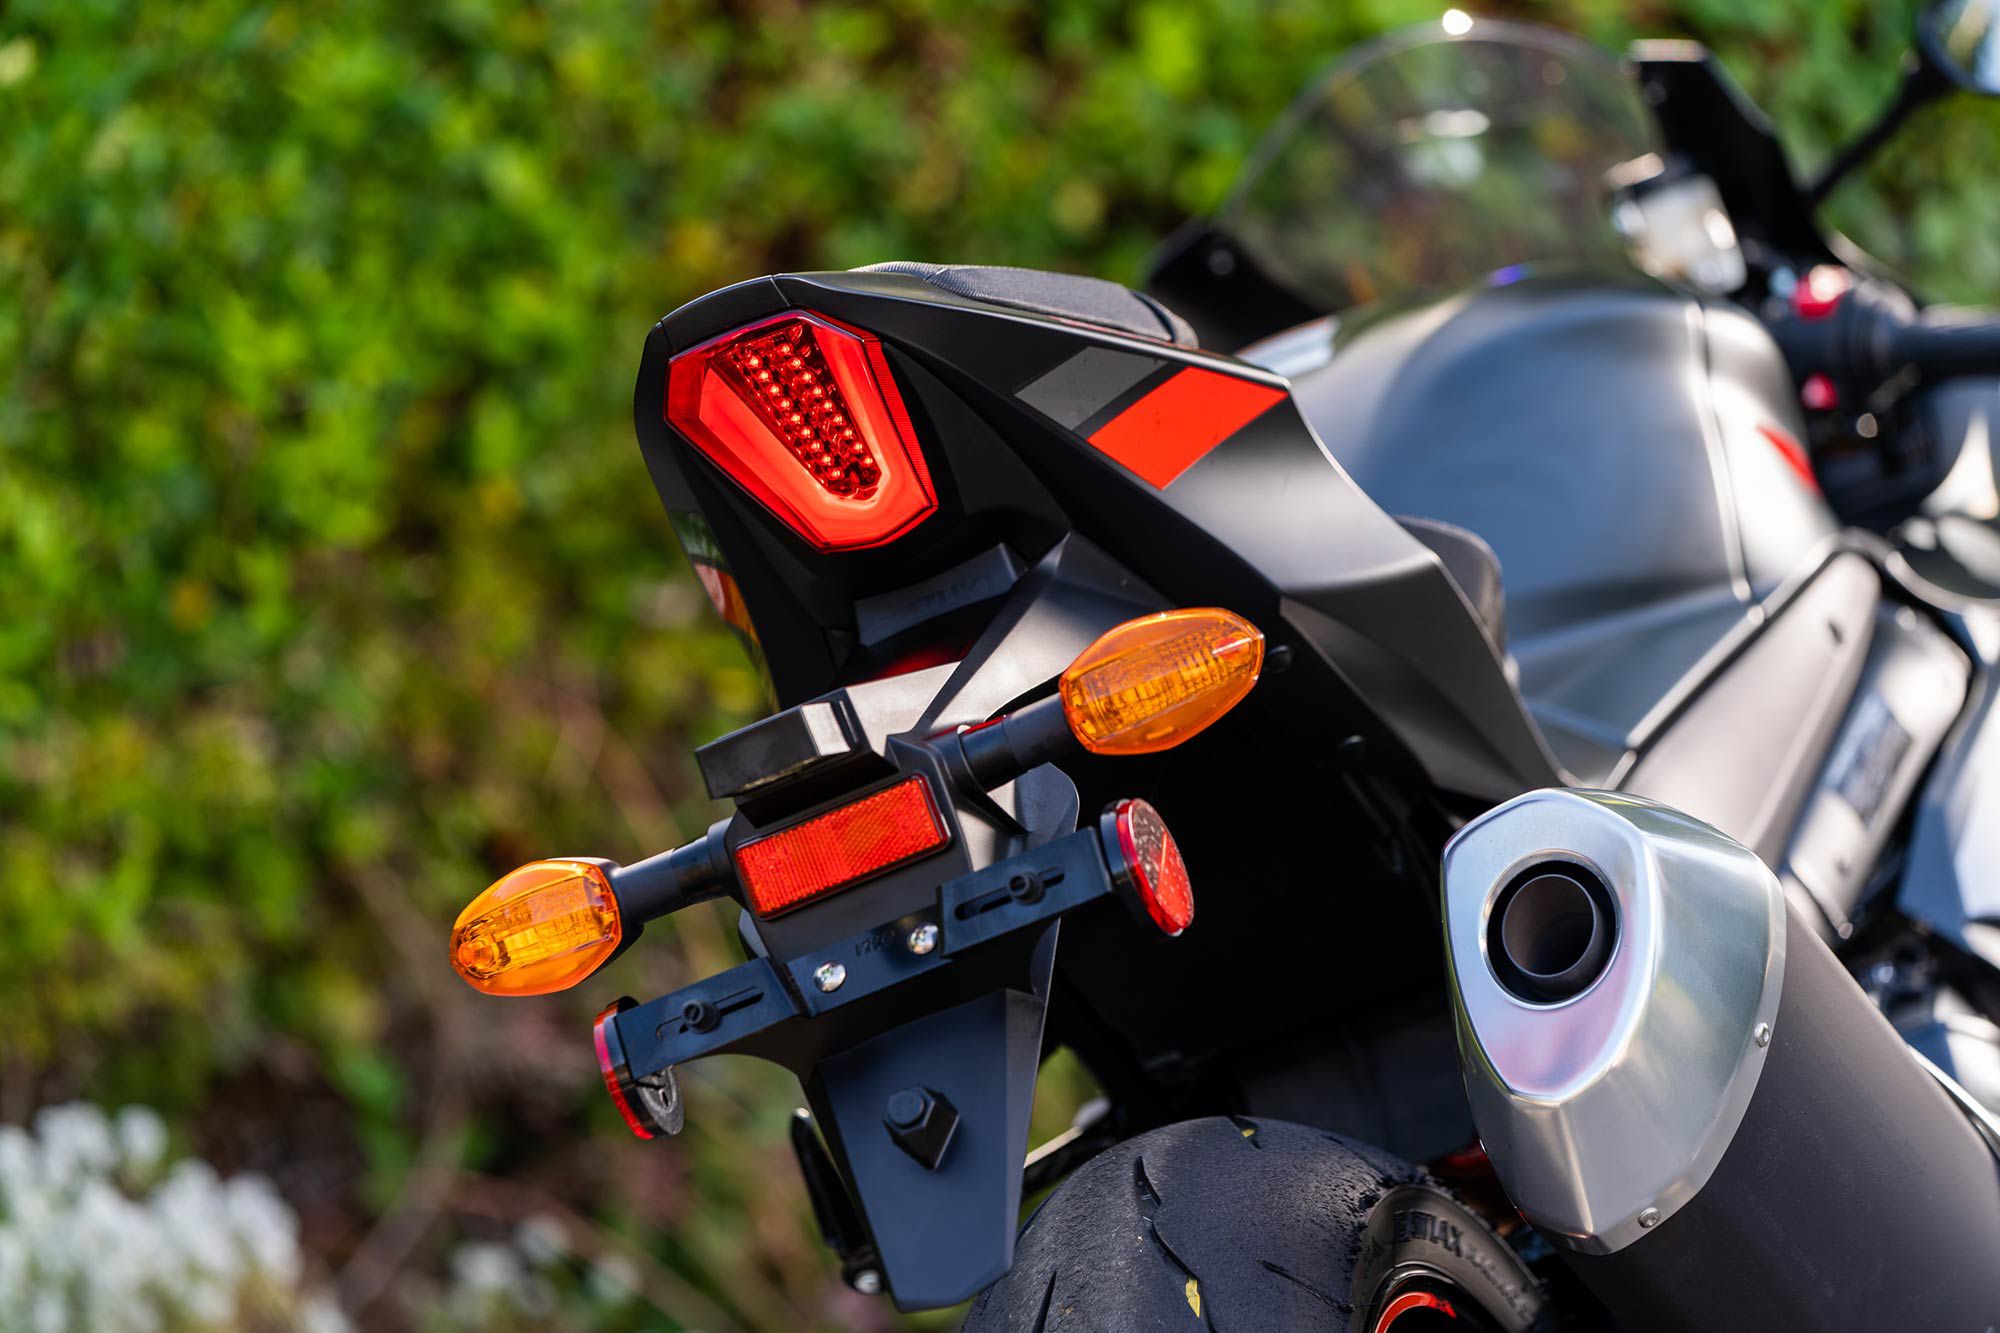 Its LED tail light is bright and helps the Suzuki rider stand out after dark. One gripe: we wish the turn signals were LED, too.